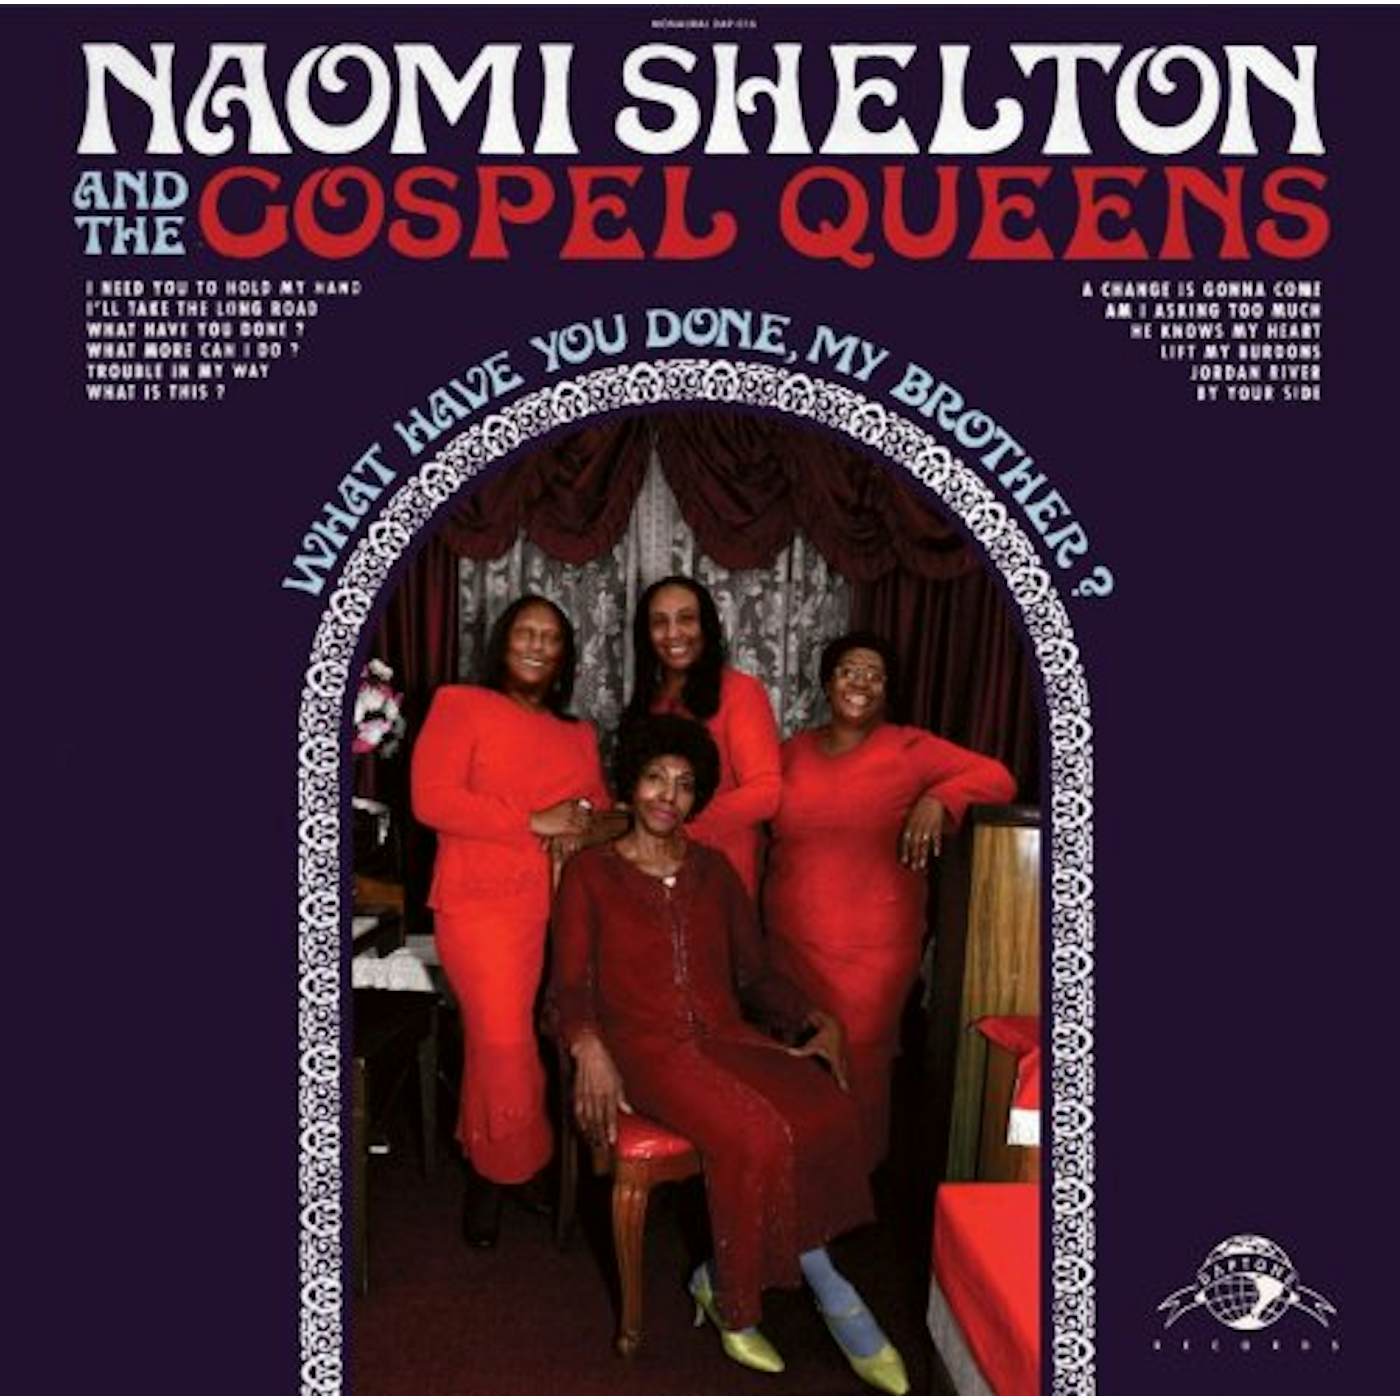 Naomi Shelton & the Gospel Queens WHAT HAVE YOU DONE MY BROTHER Vinyl Record